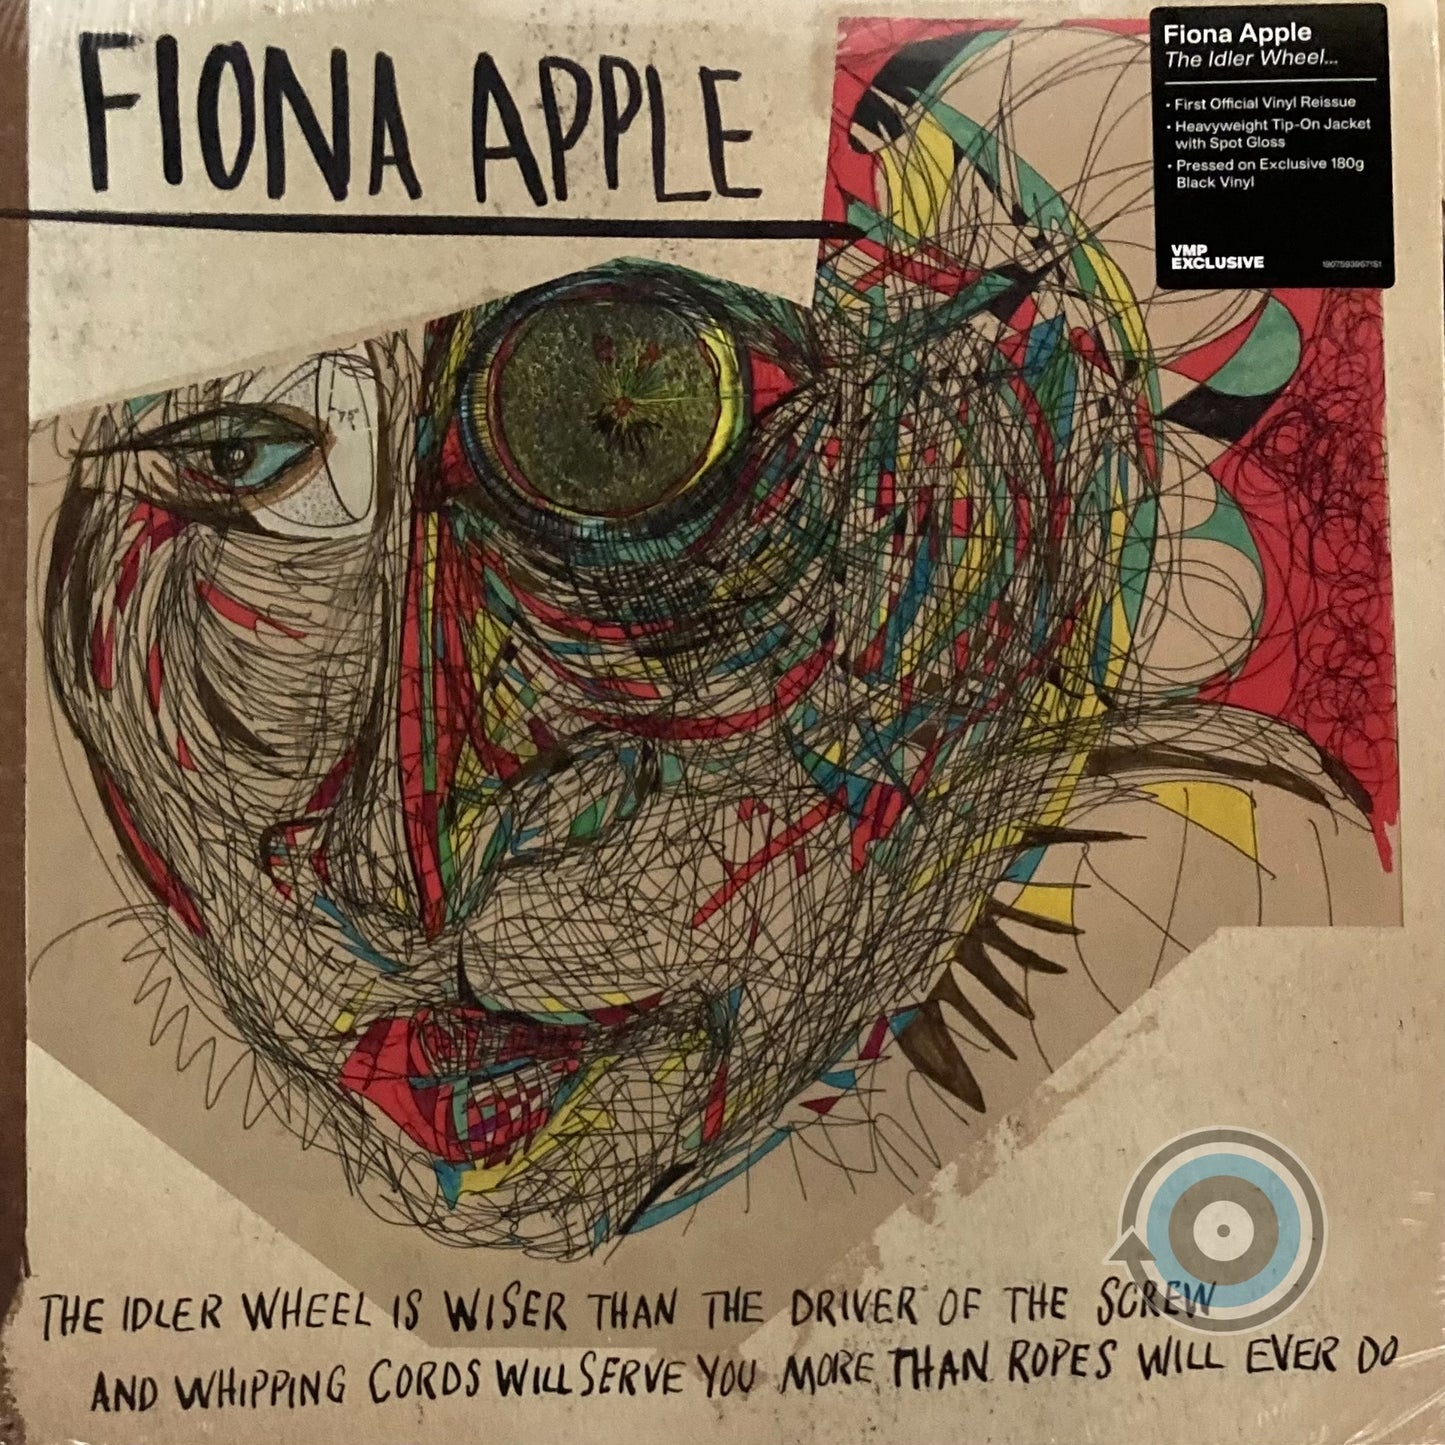 Fiona Apple - The Idler Wheel Is Wiser Than the Driver of the Screw and Whipping Cords Will Serve You More Than Ropes Will Ever Do LP (VMP Exclusive)